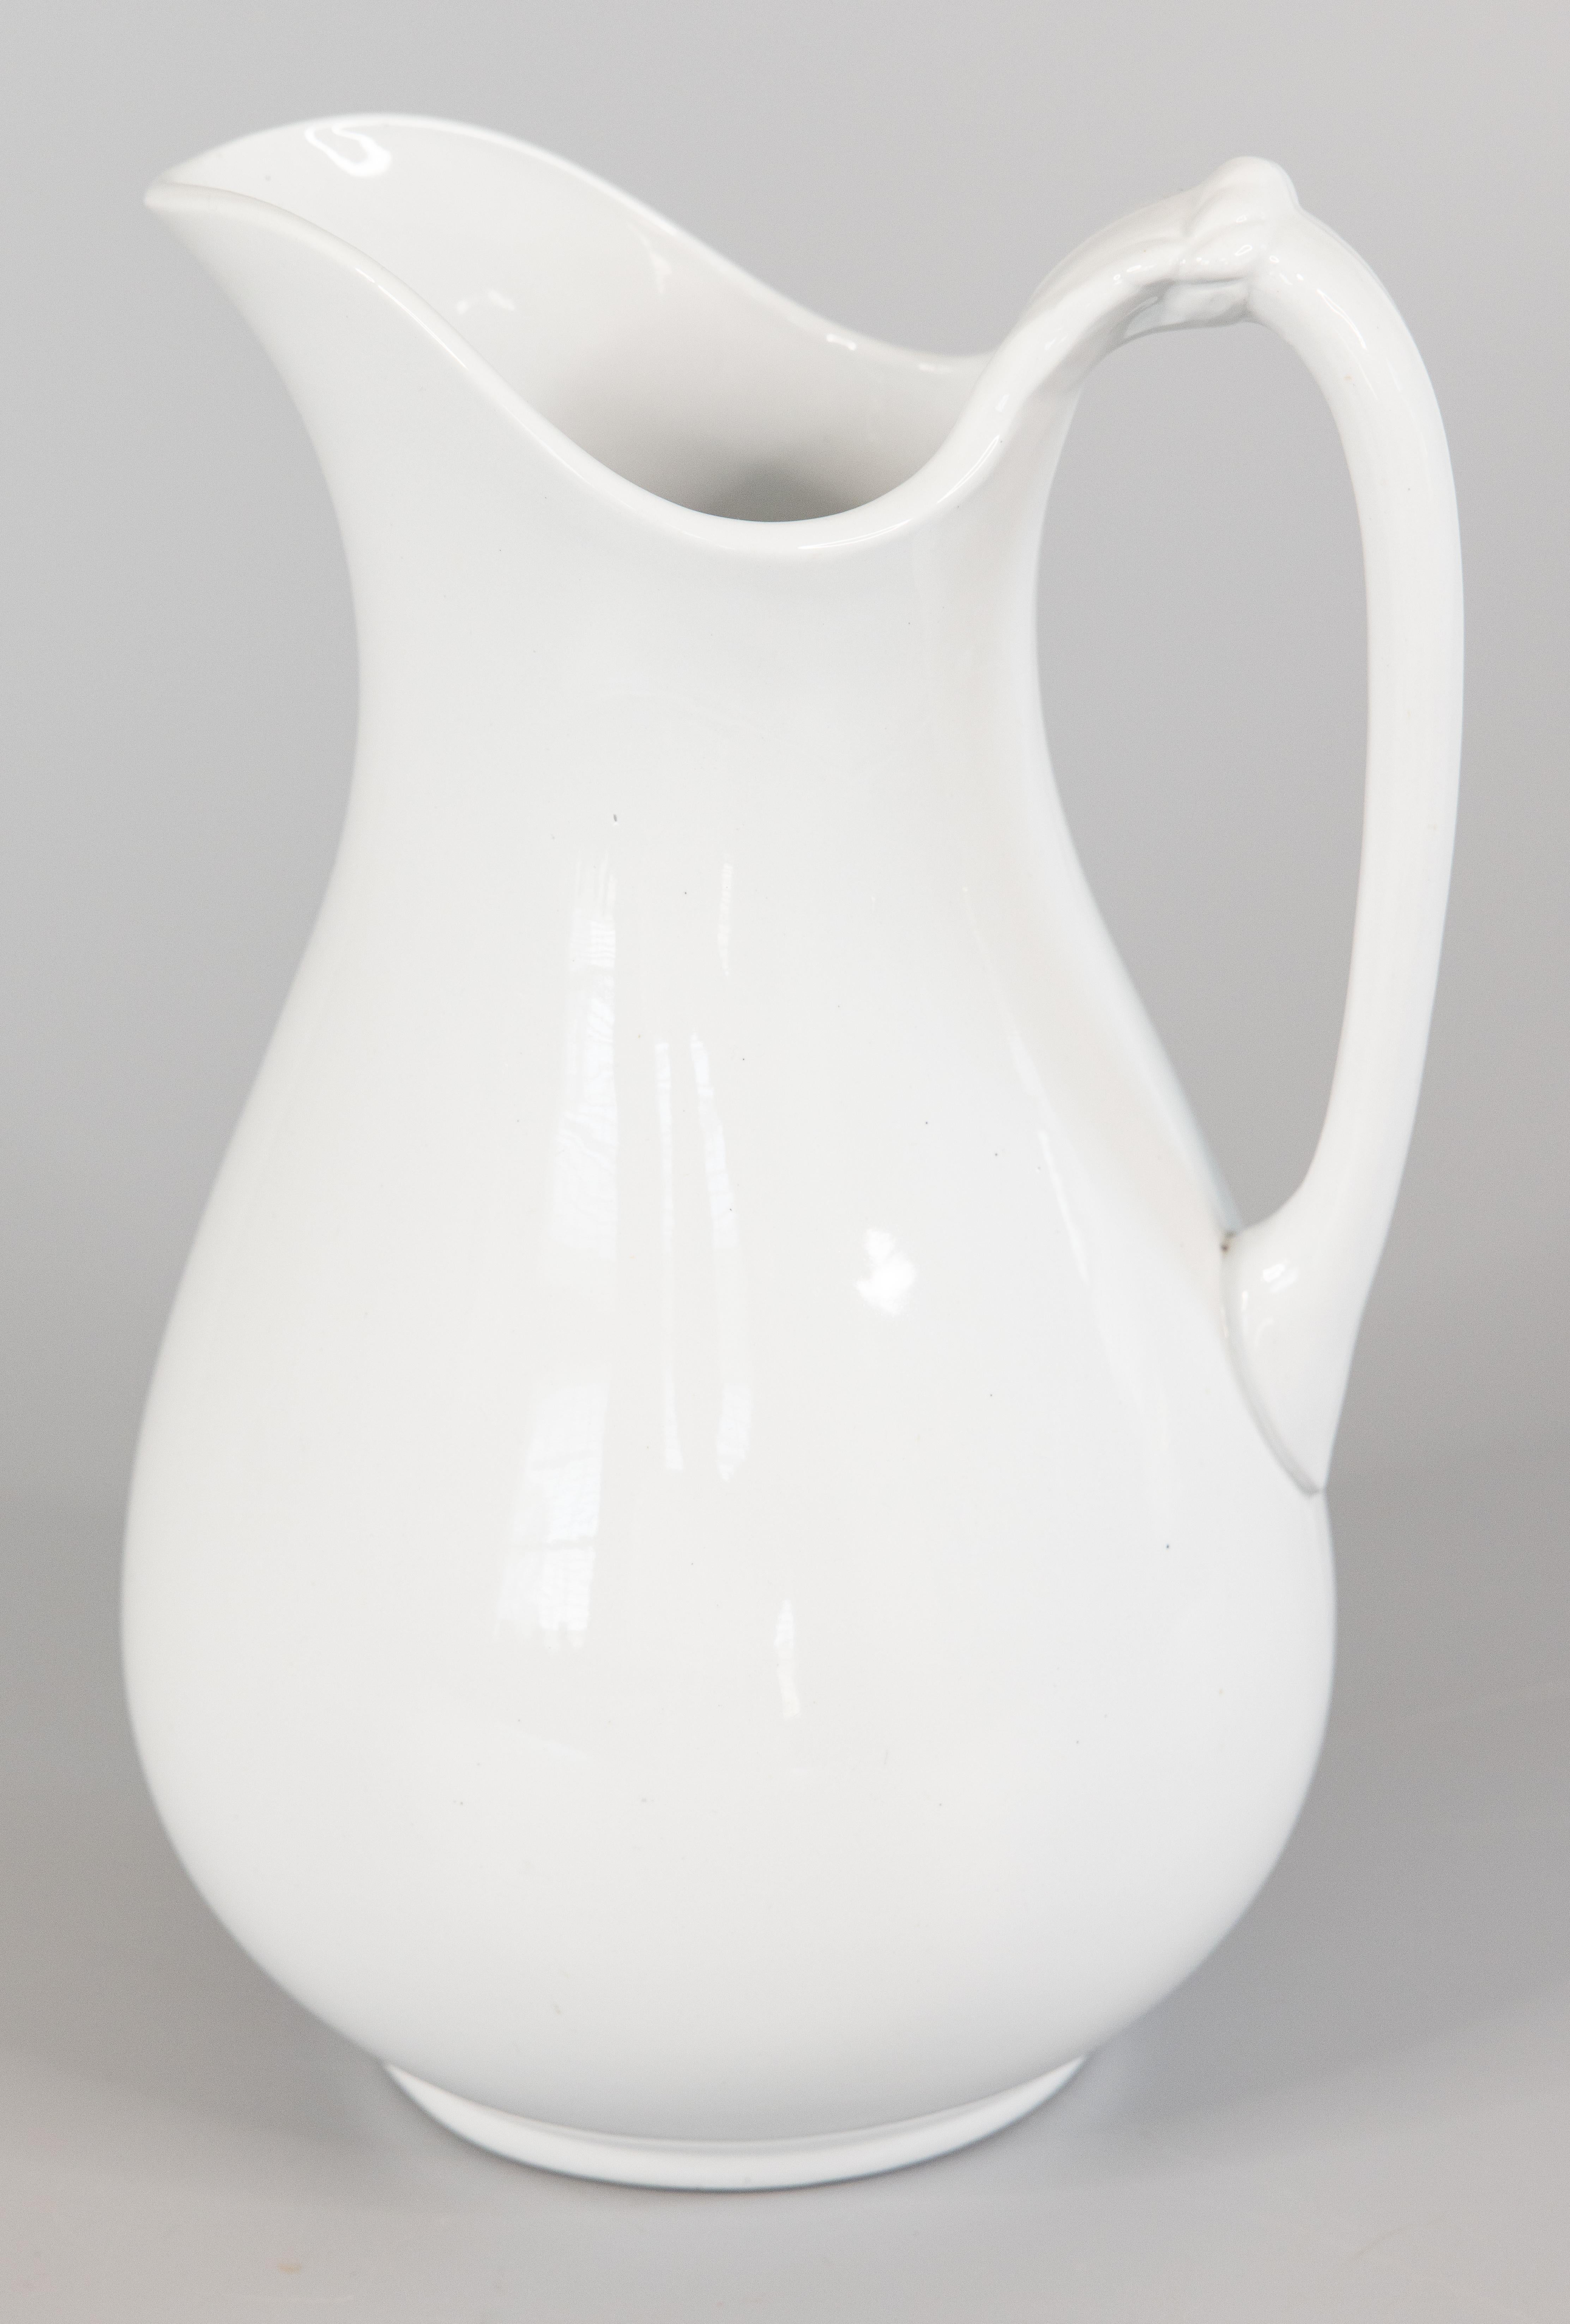 A lovely antique English white ironstone pitcher by J. & G. Meakin, circa 1890. Maker's mark on the bottom. It's a nice large size measuring 12 inches tall. This classic and timeless pitcher has a wonderful simple shape with clean lines, perfect for